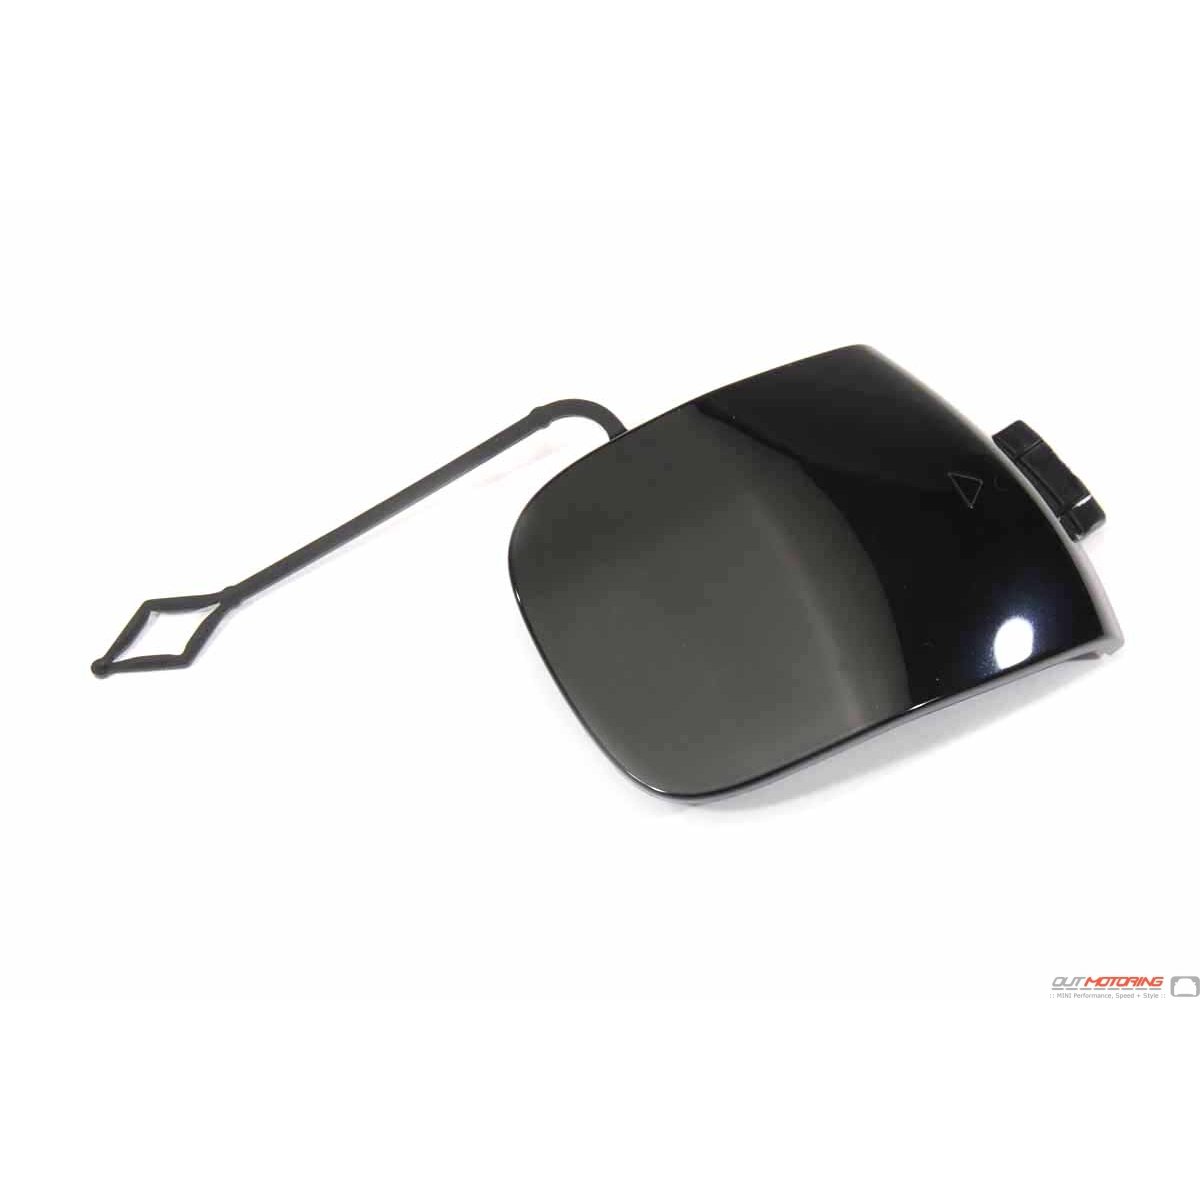 Cooper One Front Bumper Black >07/2004 7127930 MINI BMW Towing Eye Cover